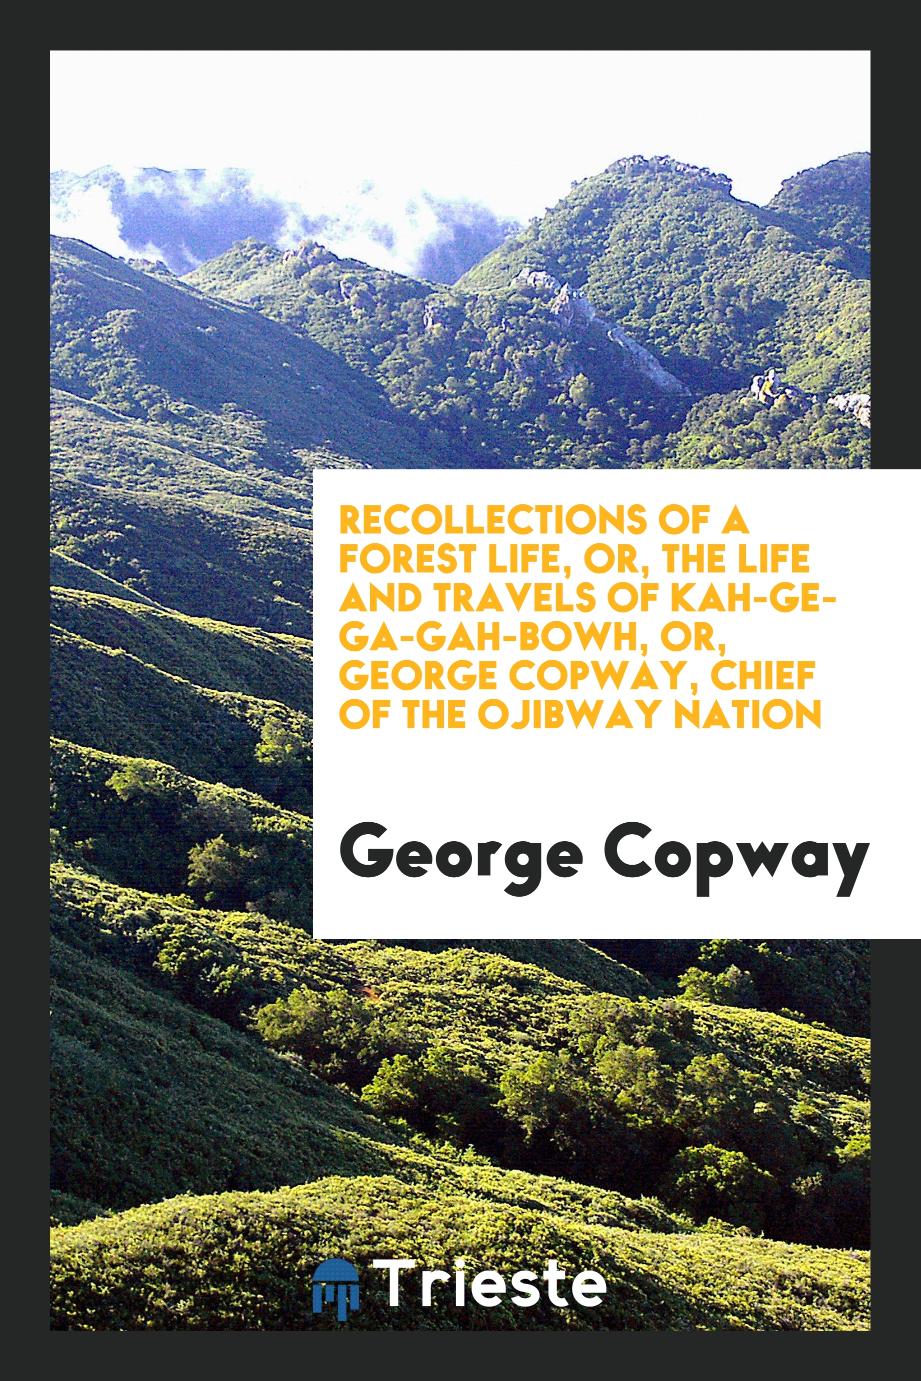 Recollections of a forest life, or, The life and travels of Kah-ge-ga-gah-bowh, or, George Copway, chief of the Ojibway nation